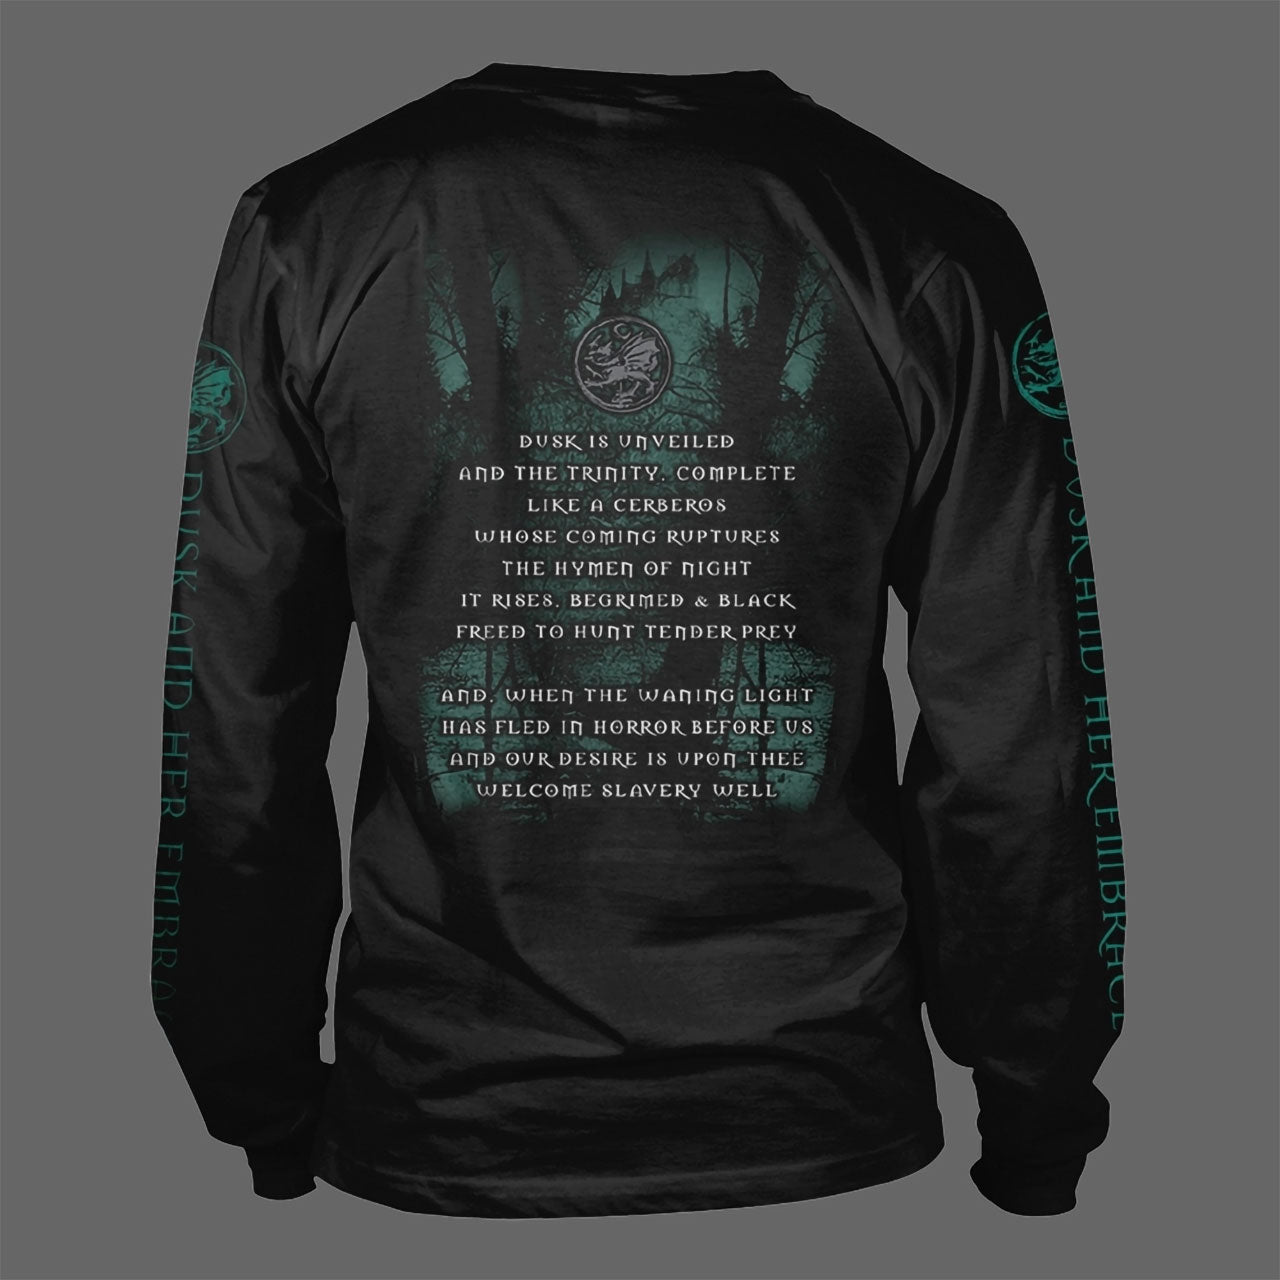 Cradle of Filth - Dusk and Her Embrace (Long Sleeve T-Shirt)